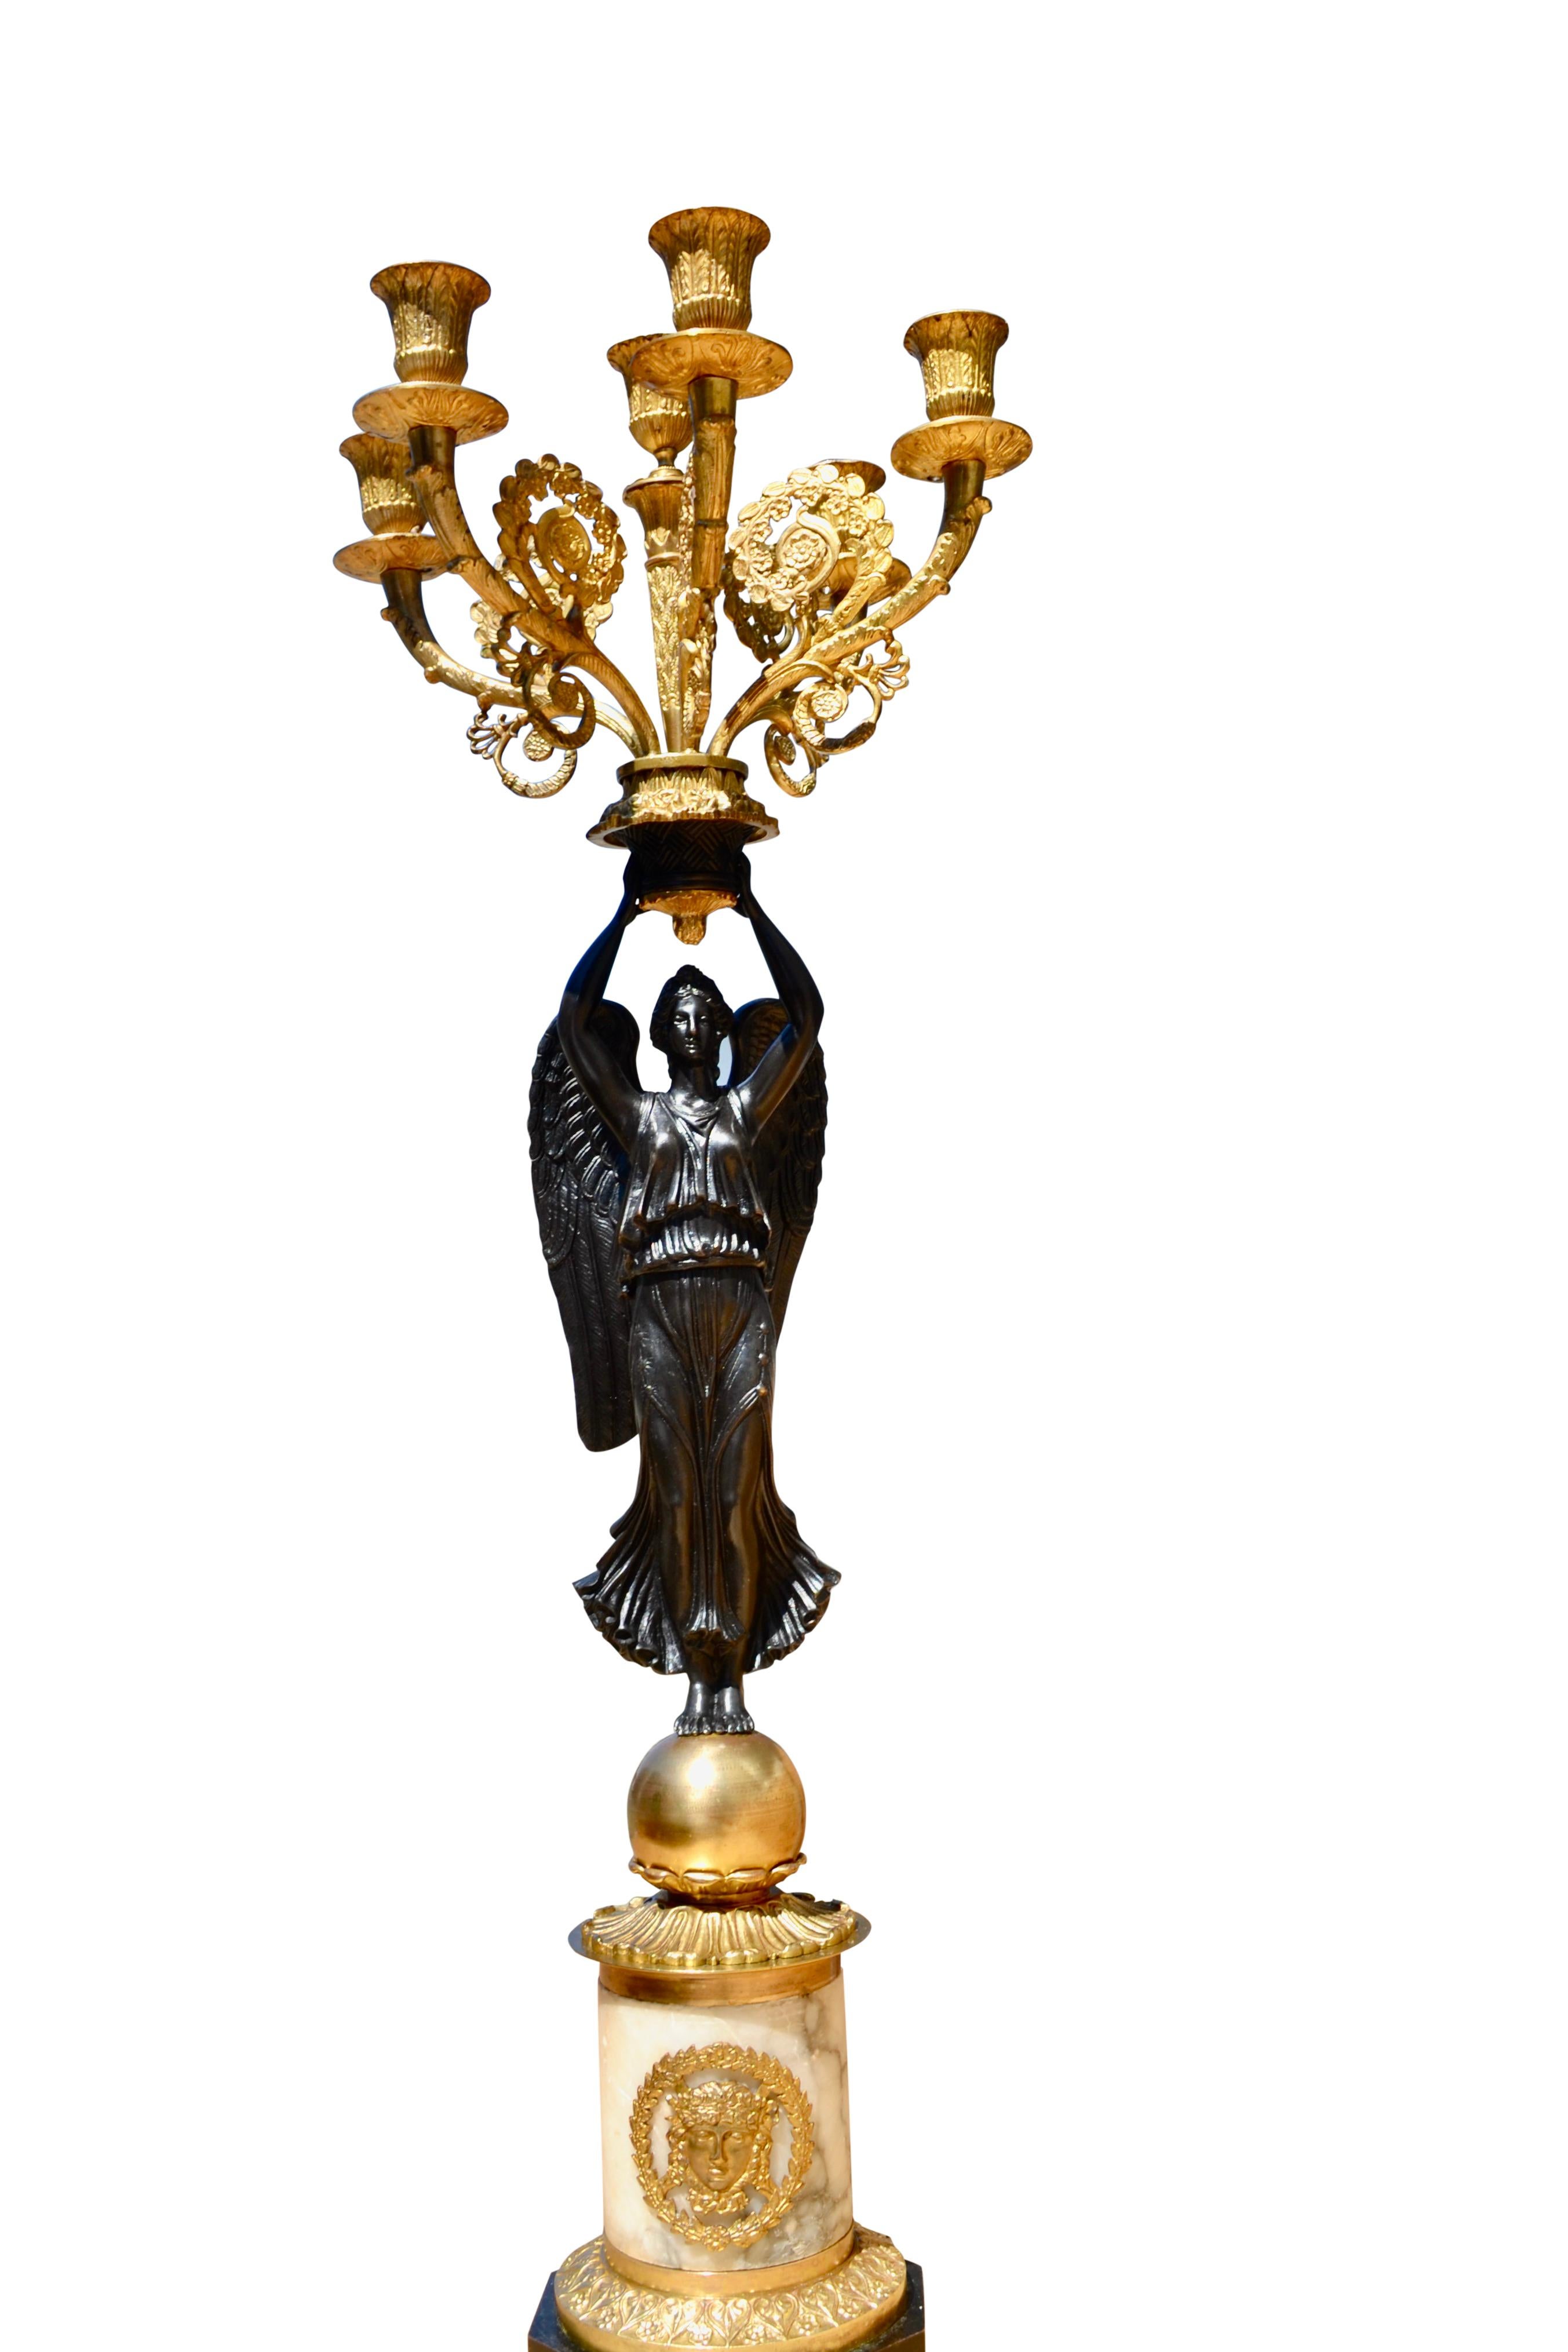 Single French Empire Style Patinated  and Gilt Bronze Winged Victory Candelabra For Sale 5